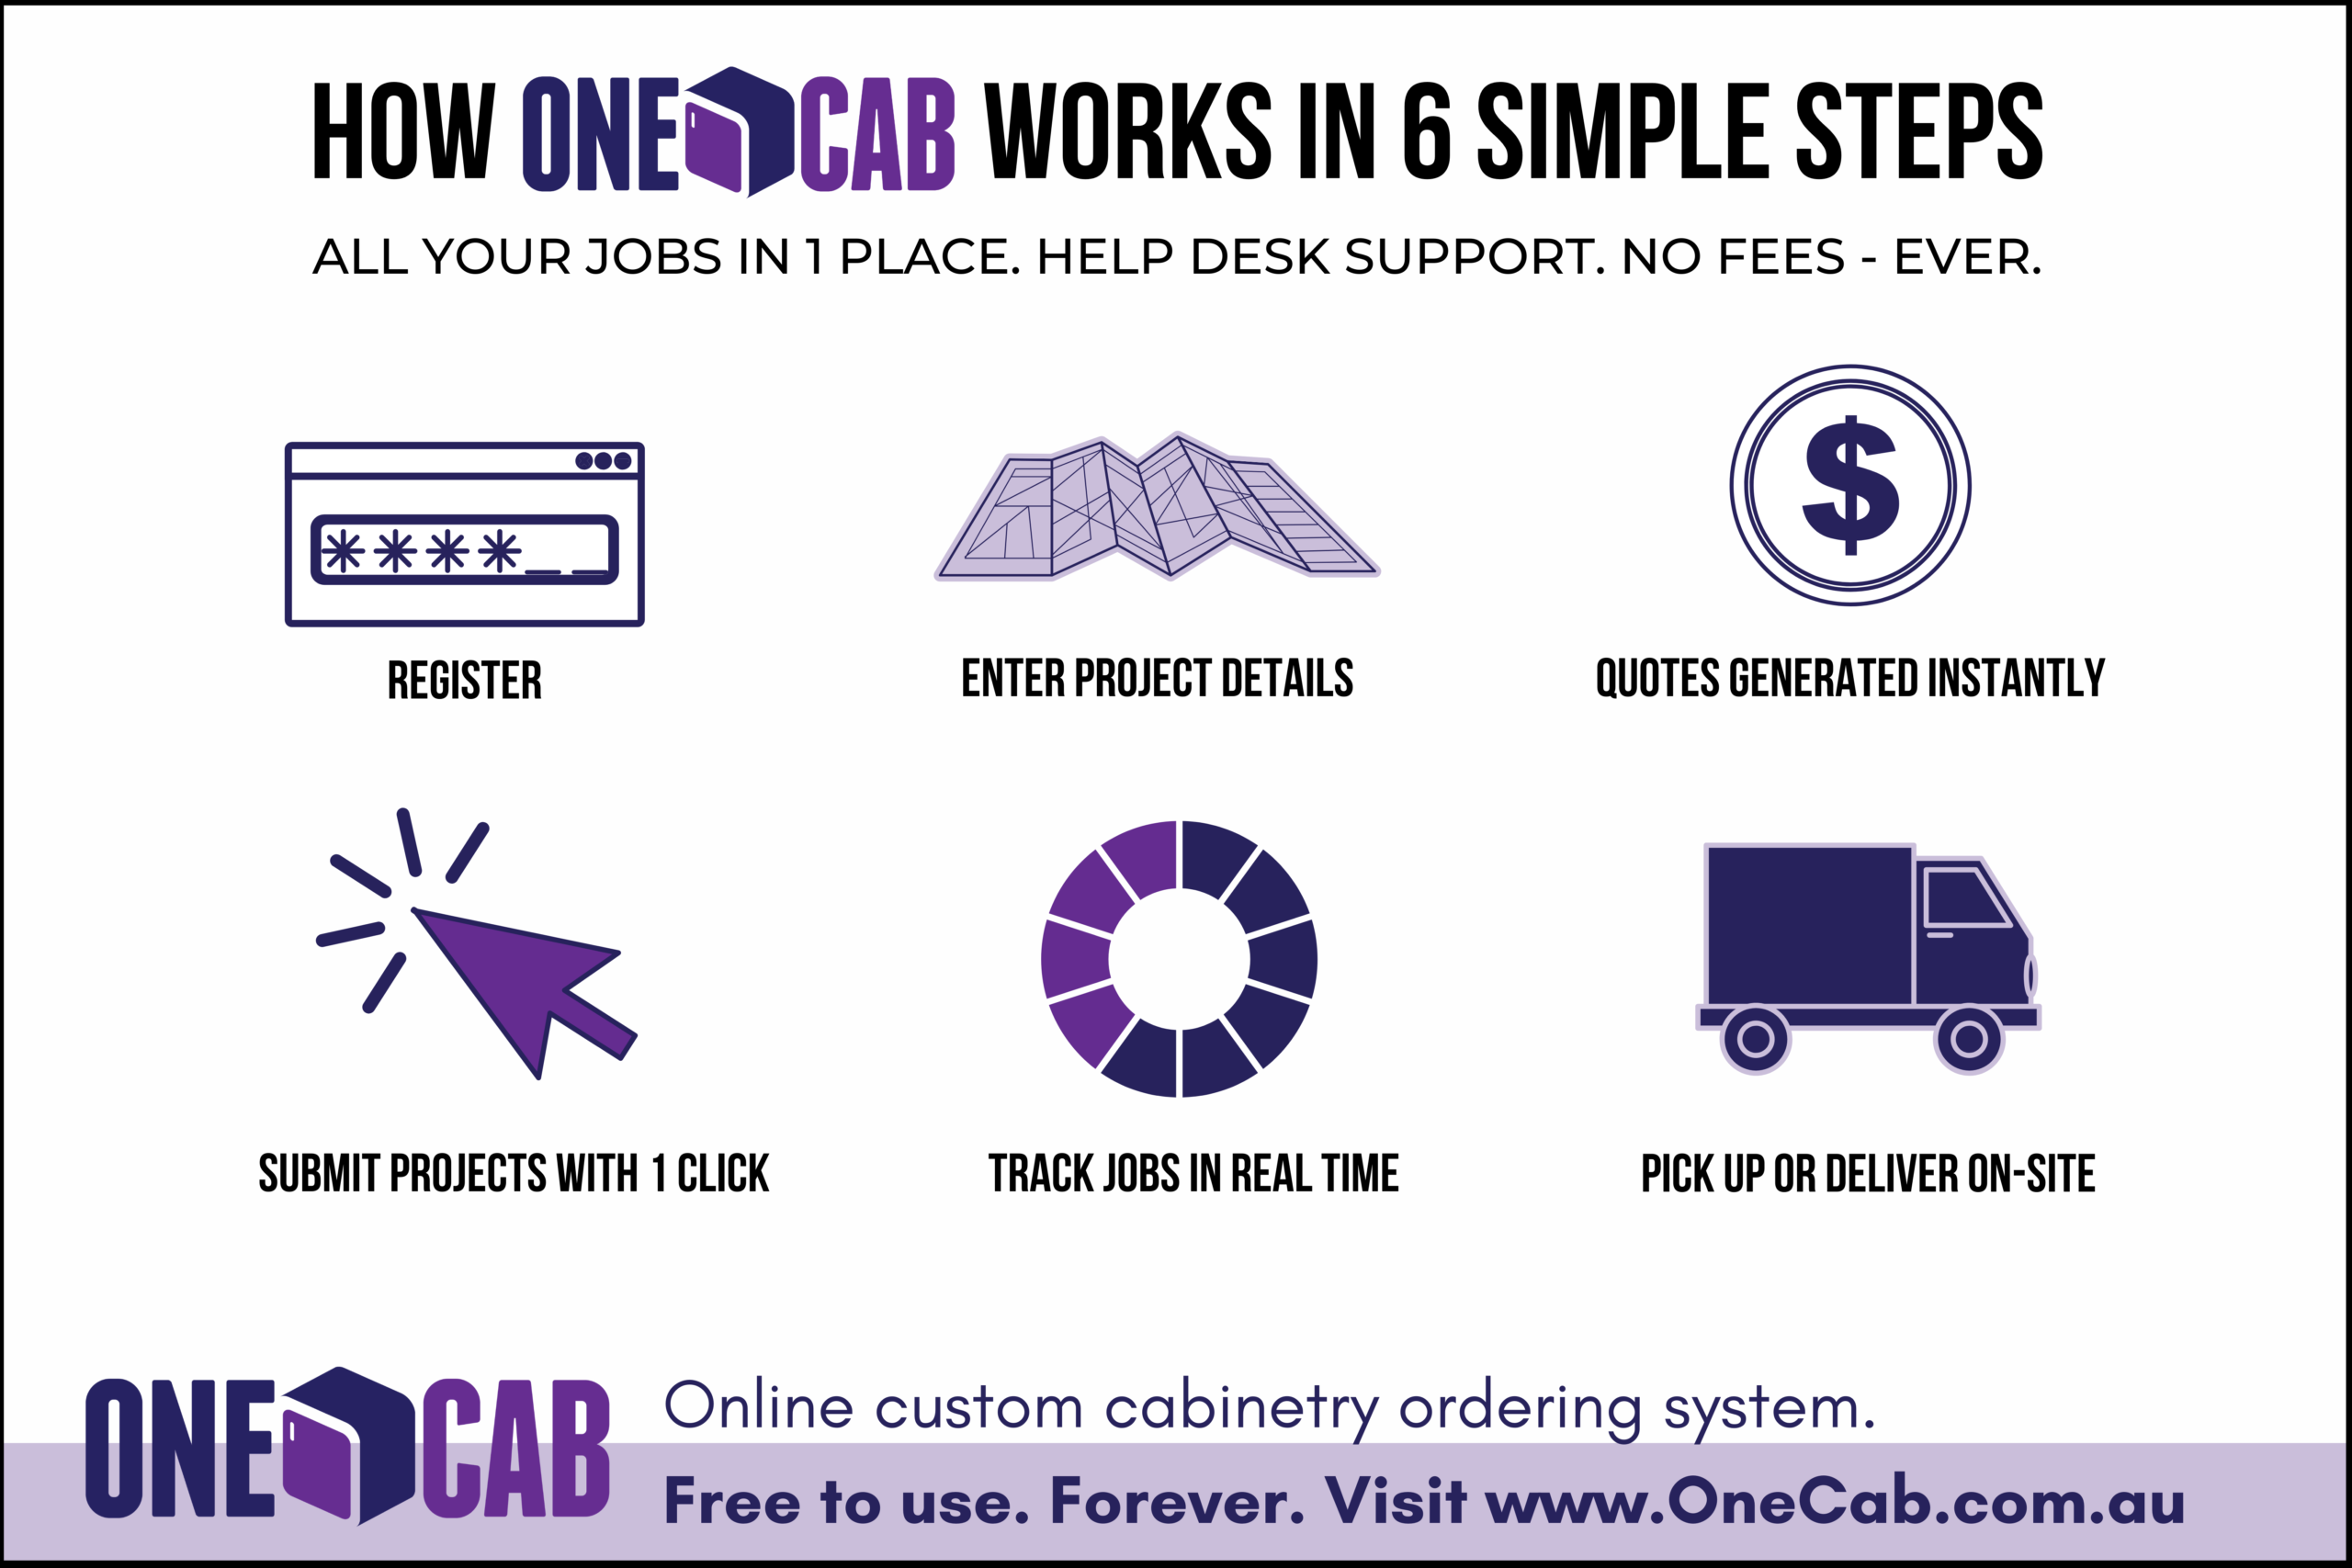 OneCab in 6 steps